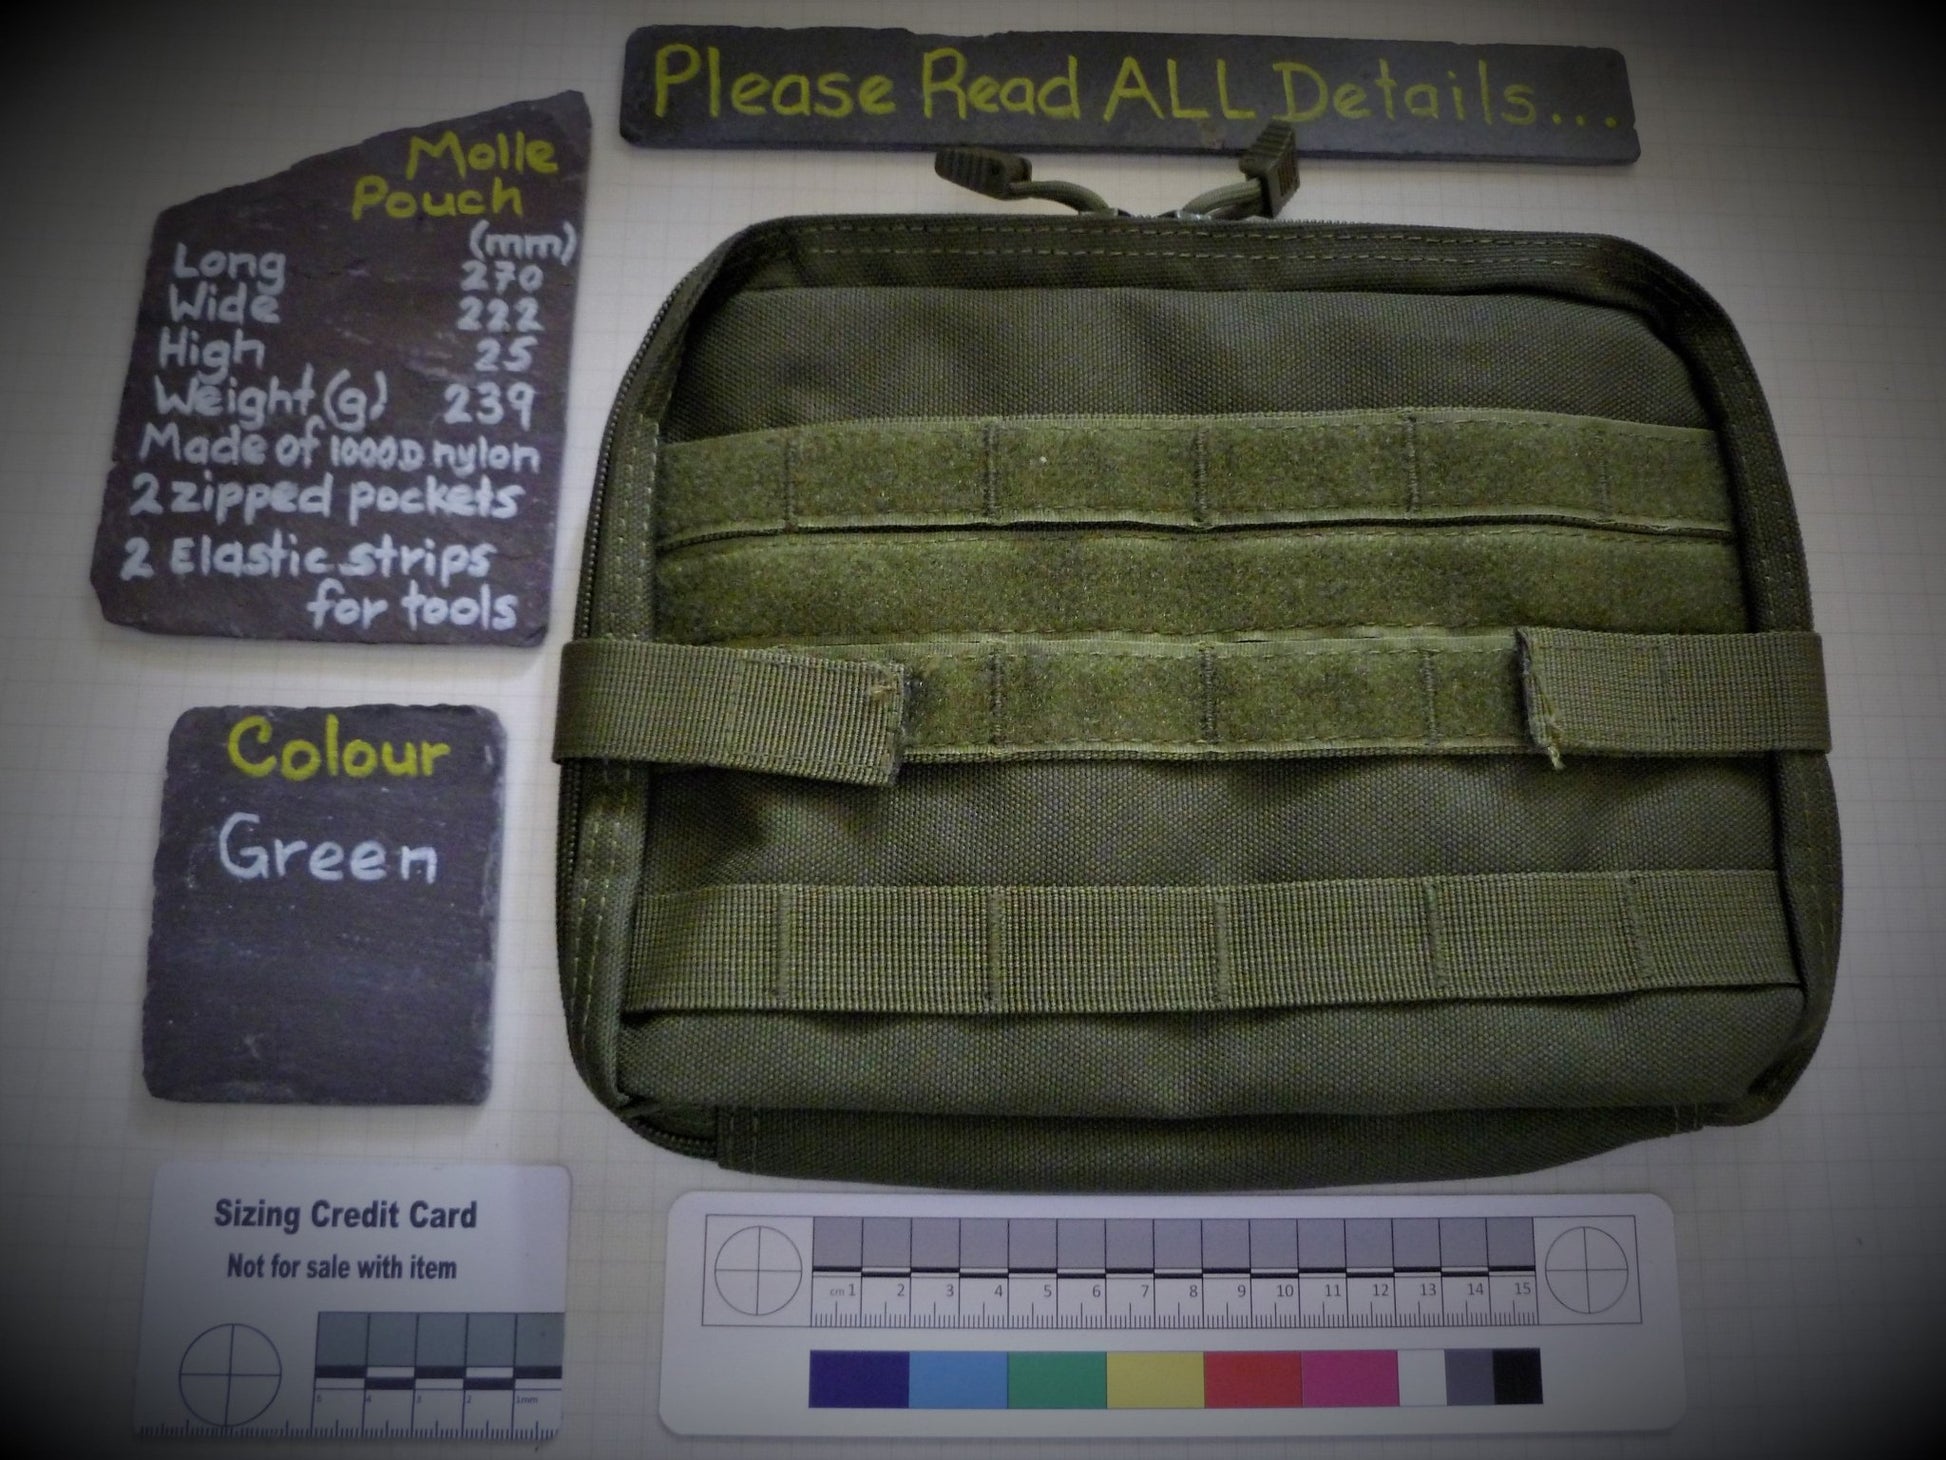 Large Molle Pouch for the Modular Lightweight Load-carrying Equipment system Molle Pouch Huggins Attic Green   [Huggins attic]